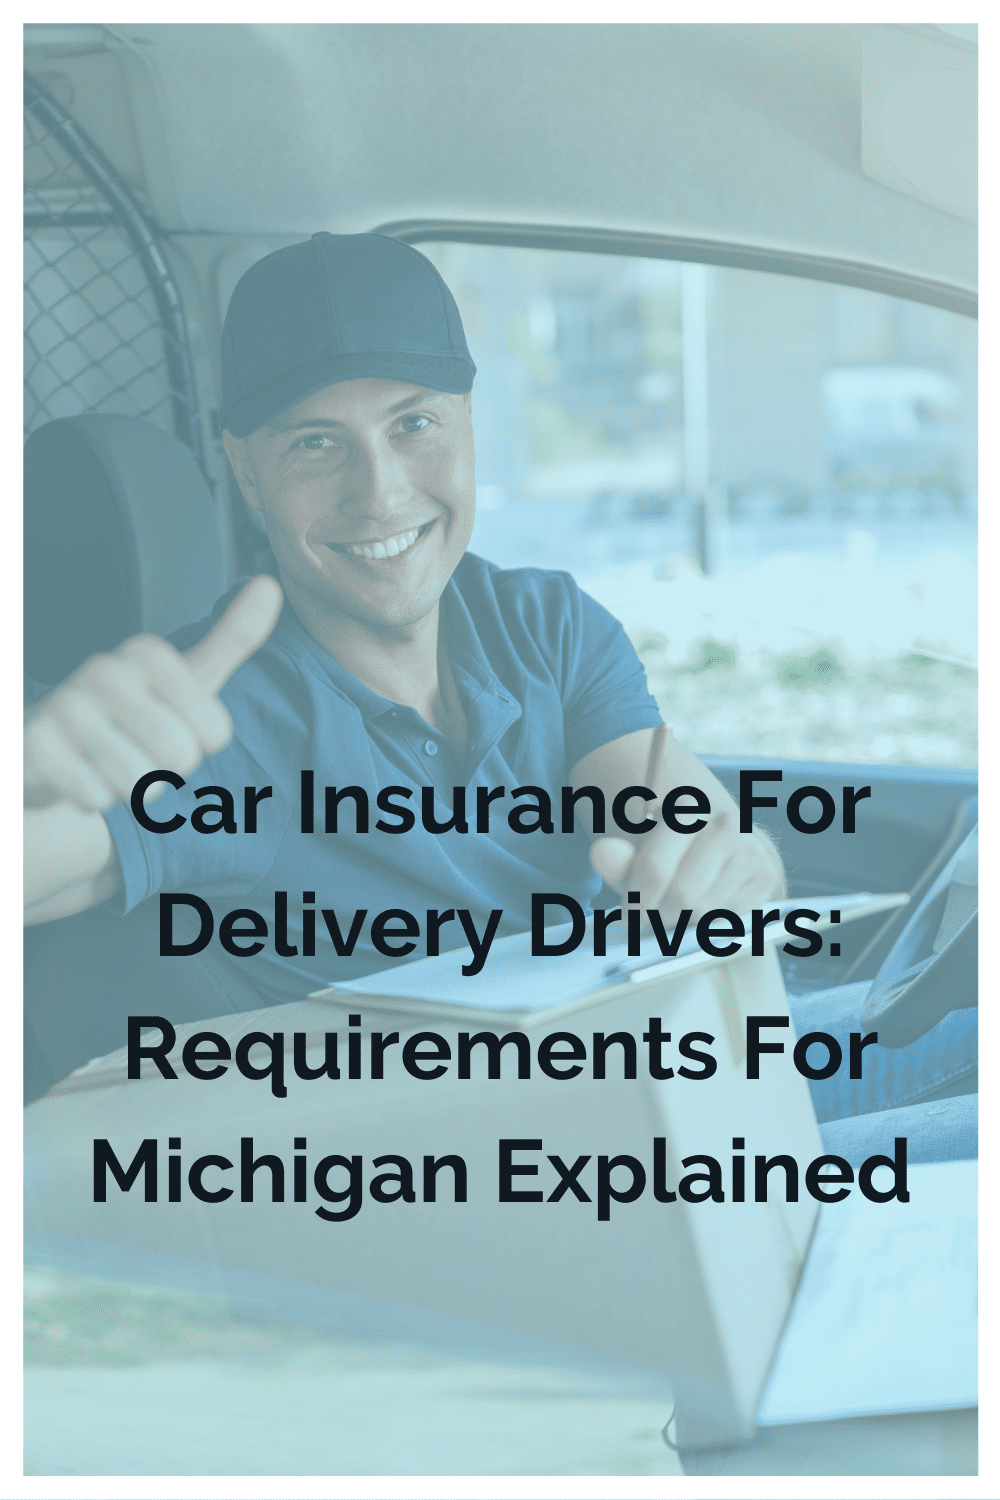 Car Insurance For Delivery Drivers: Requirements For Michigan Explained